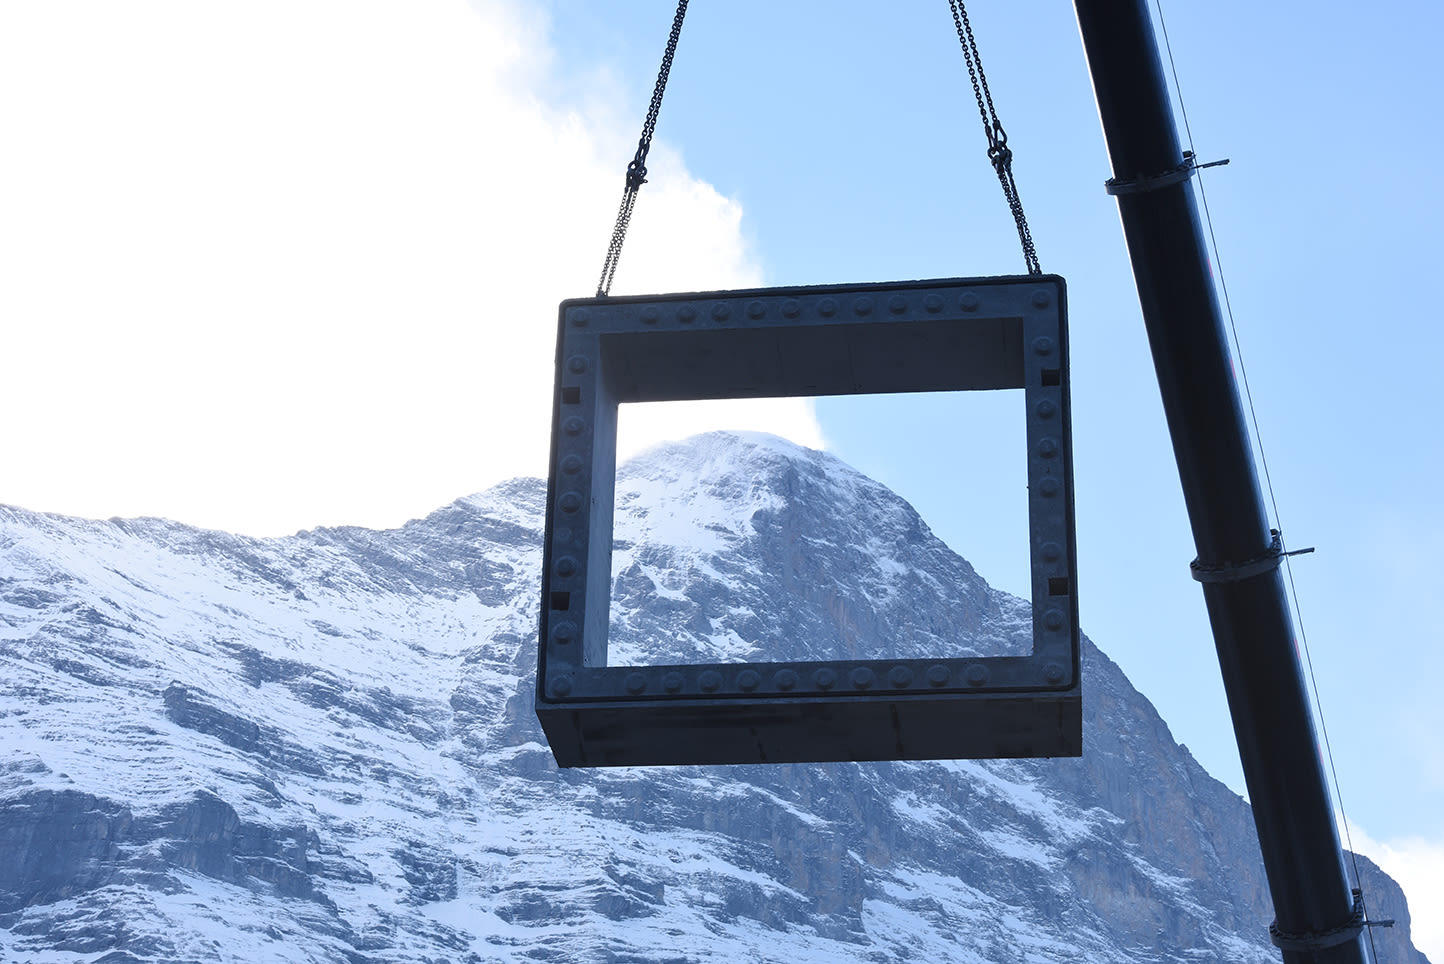 Crane hoists a frame, with Eiger summit in background